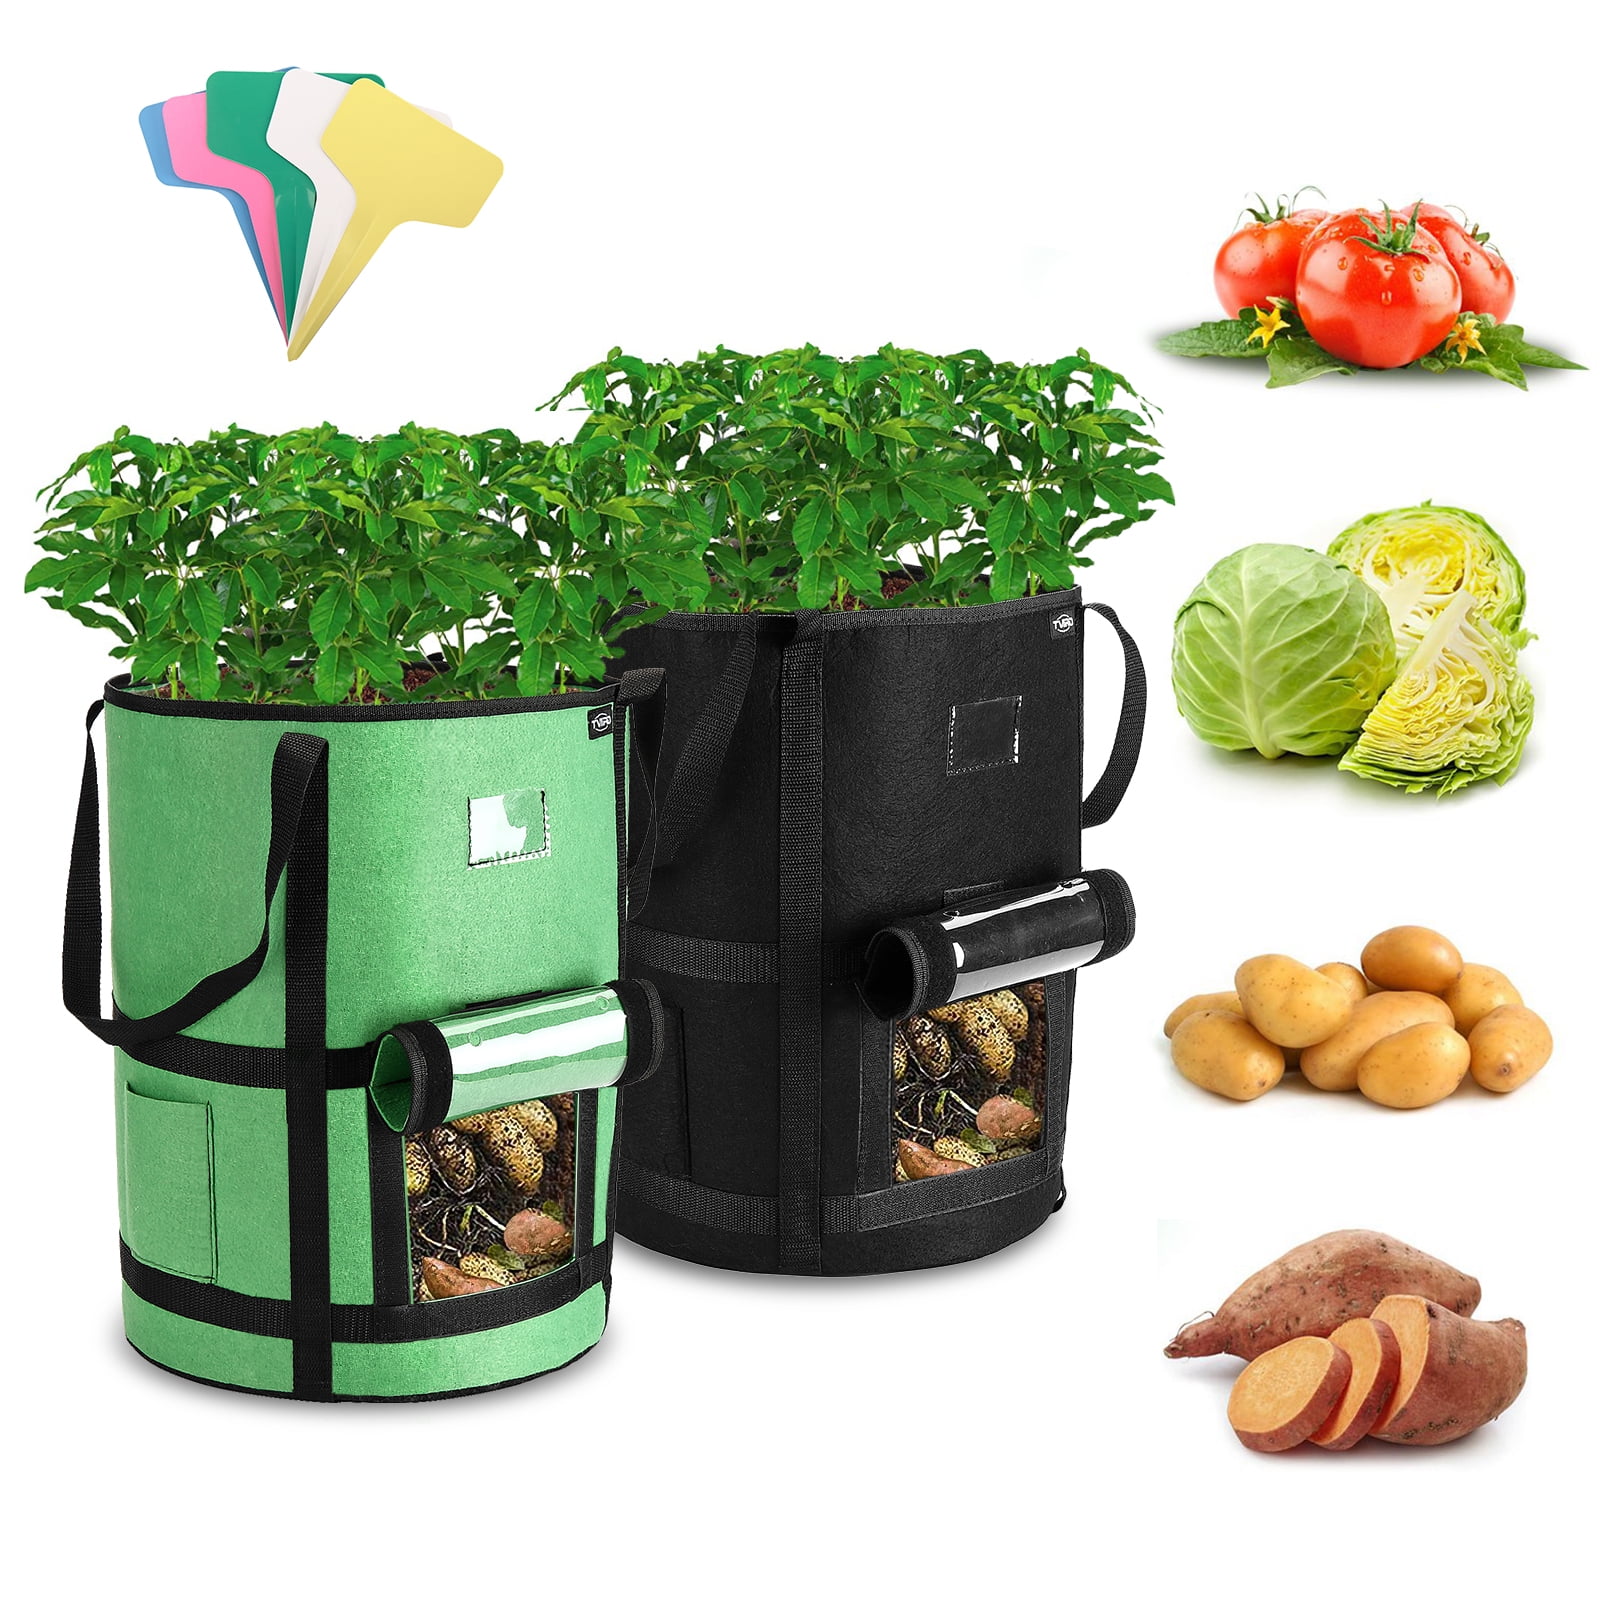 Auofin 6 Pack 10 Gallon Potato Grow Bags Garden Planting Bags Potato  Planter with Handles and Flap Aeration Heavy Duty for Growing Potatoes